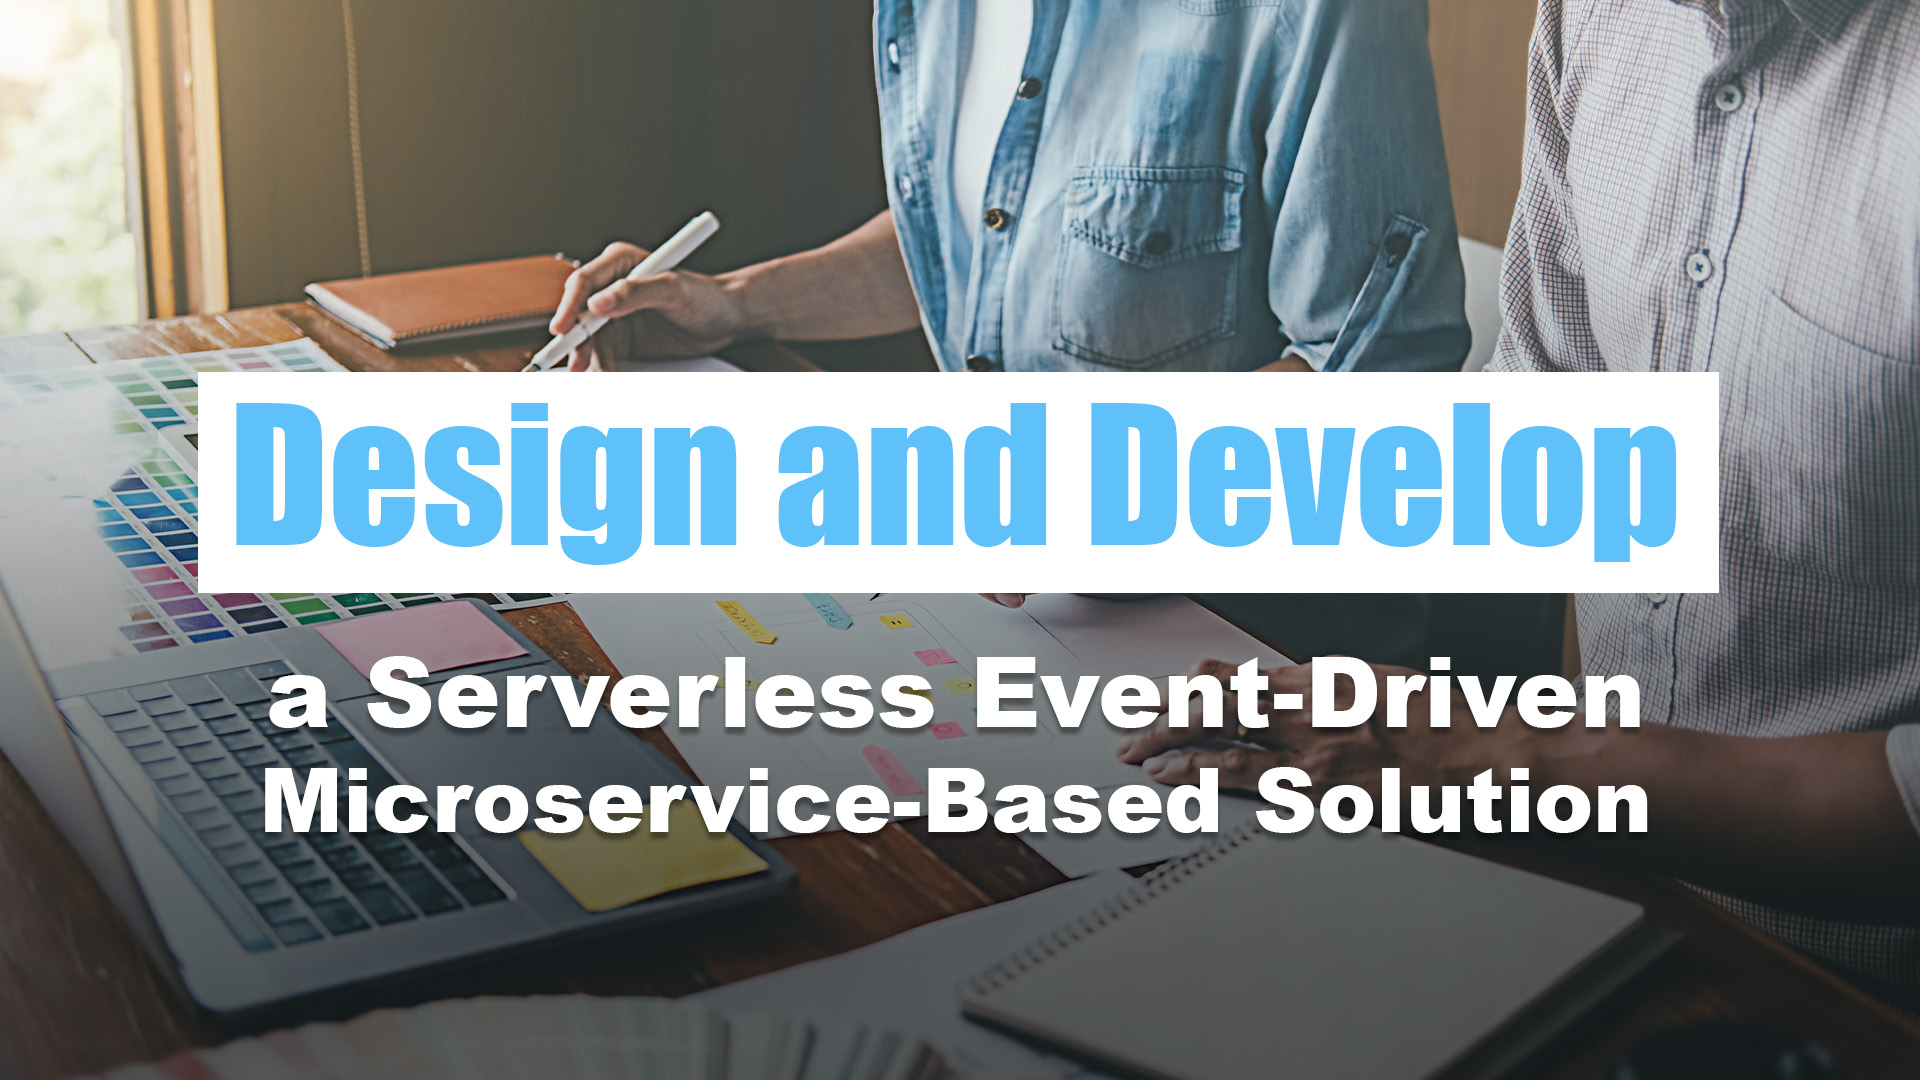 Design and Develop a Serverless Event-Driven Microservice-Based Solution